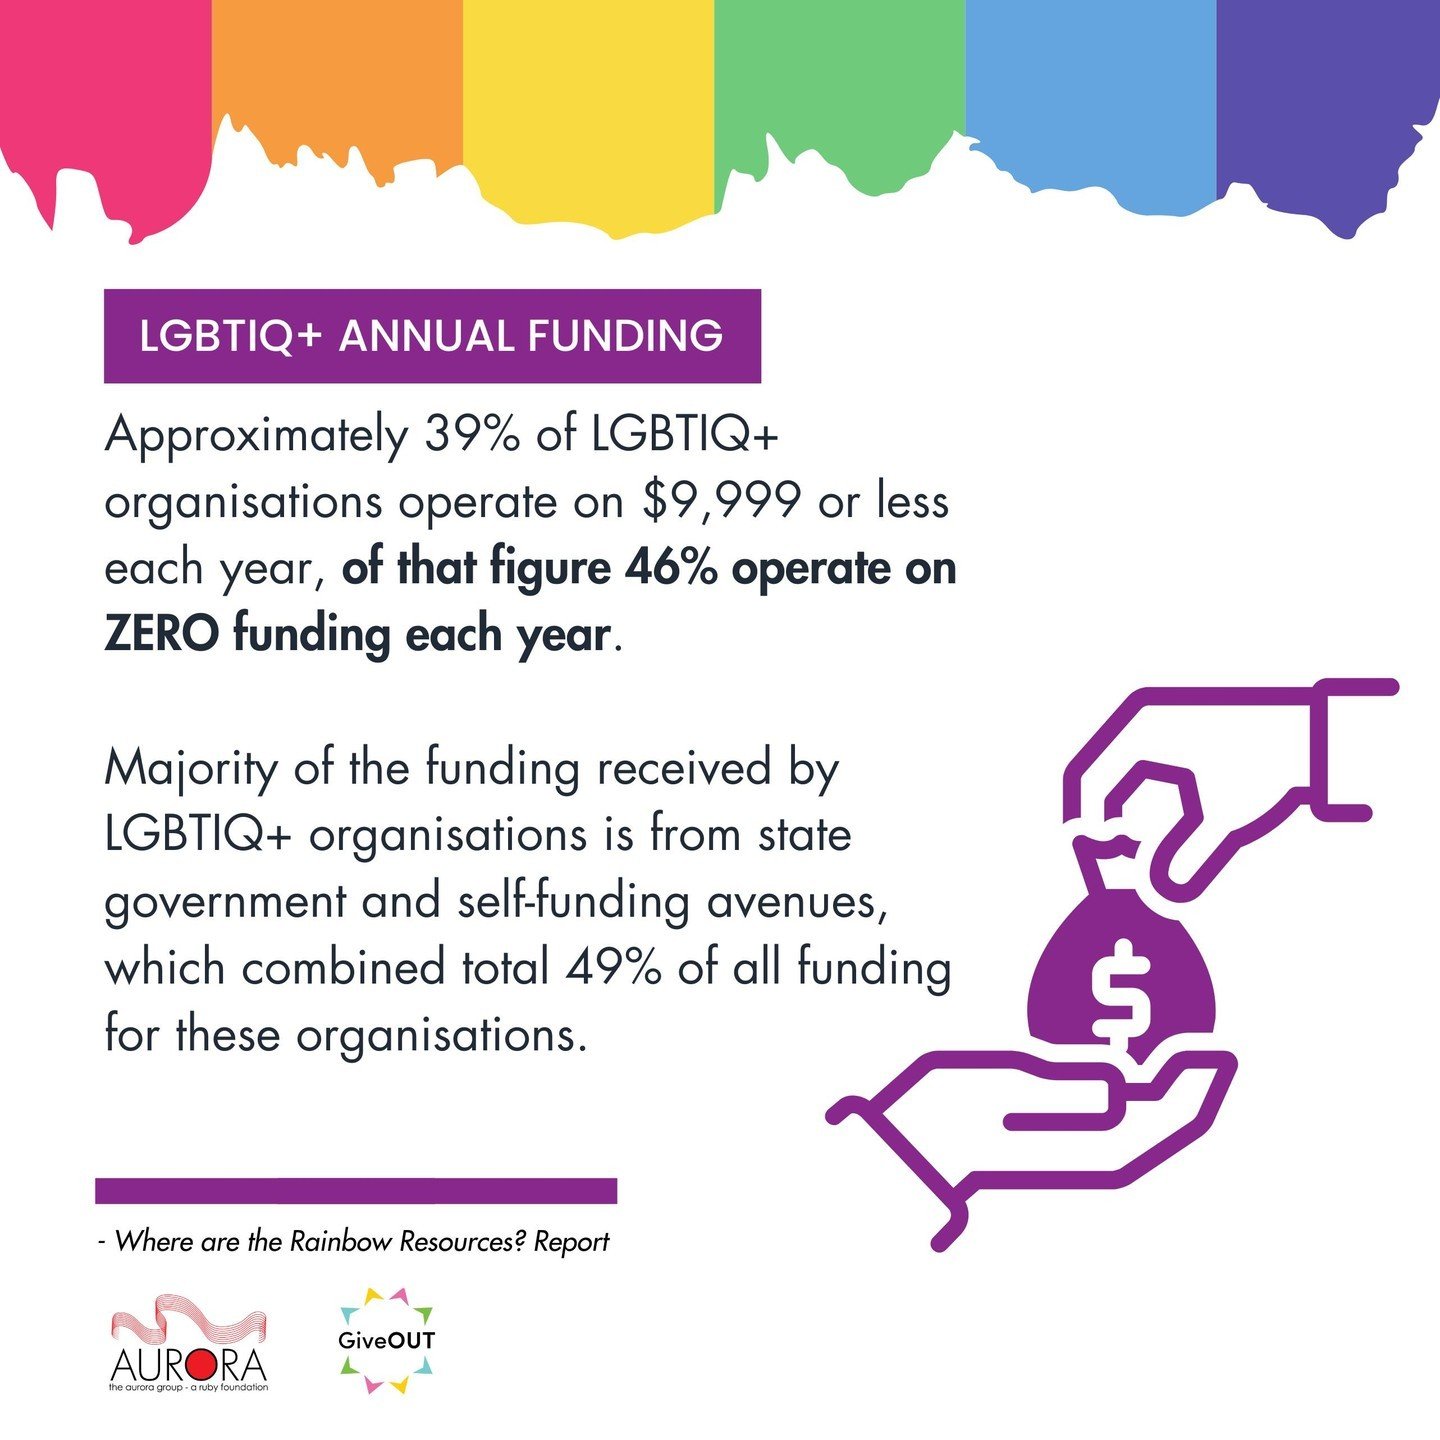 Everyone in our country deserves the right to get the support they need 🌈

LGBTIQ+ communities are some of the most under-resourced in Australia. For every $100 of government funding, LGBTIQ+ organisations receive just 6 cents. Yet government fundin